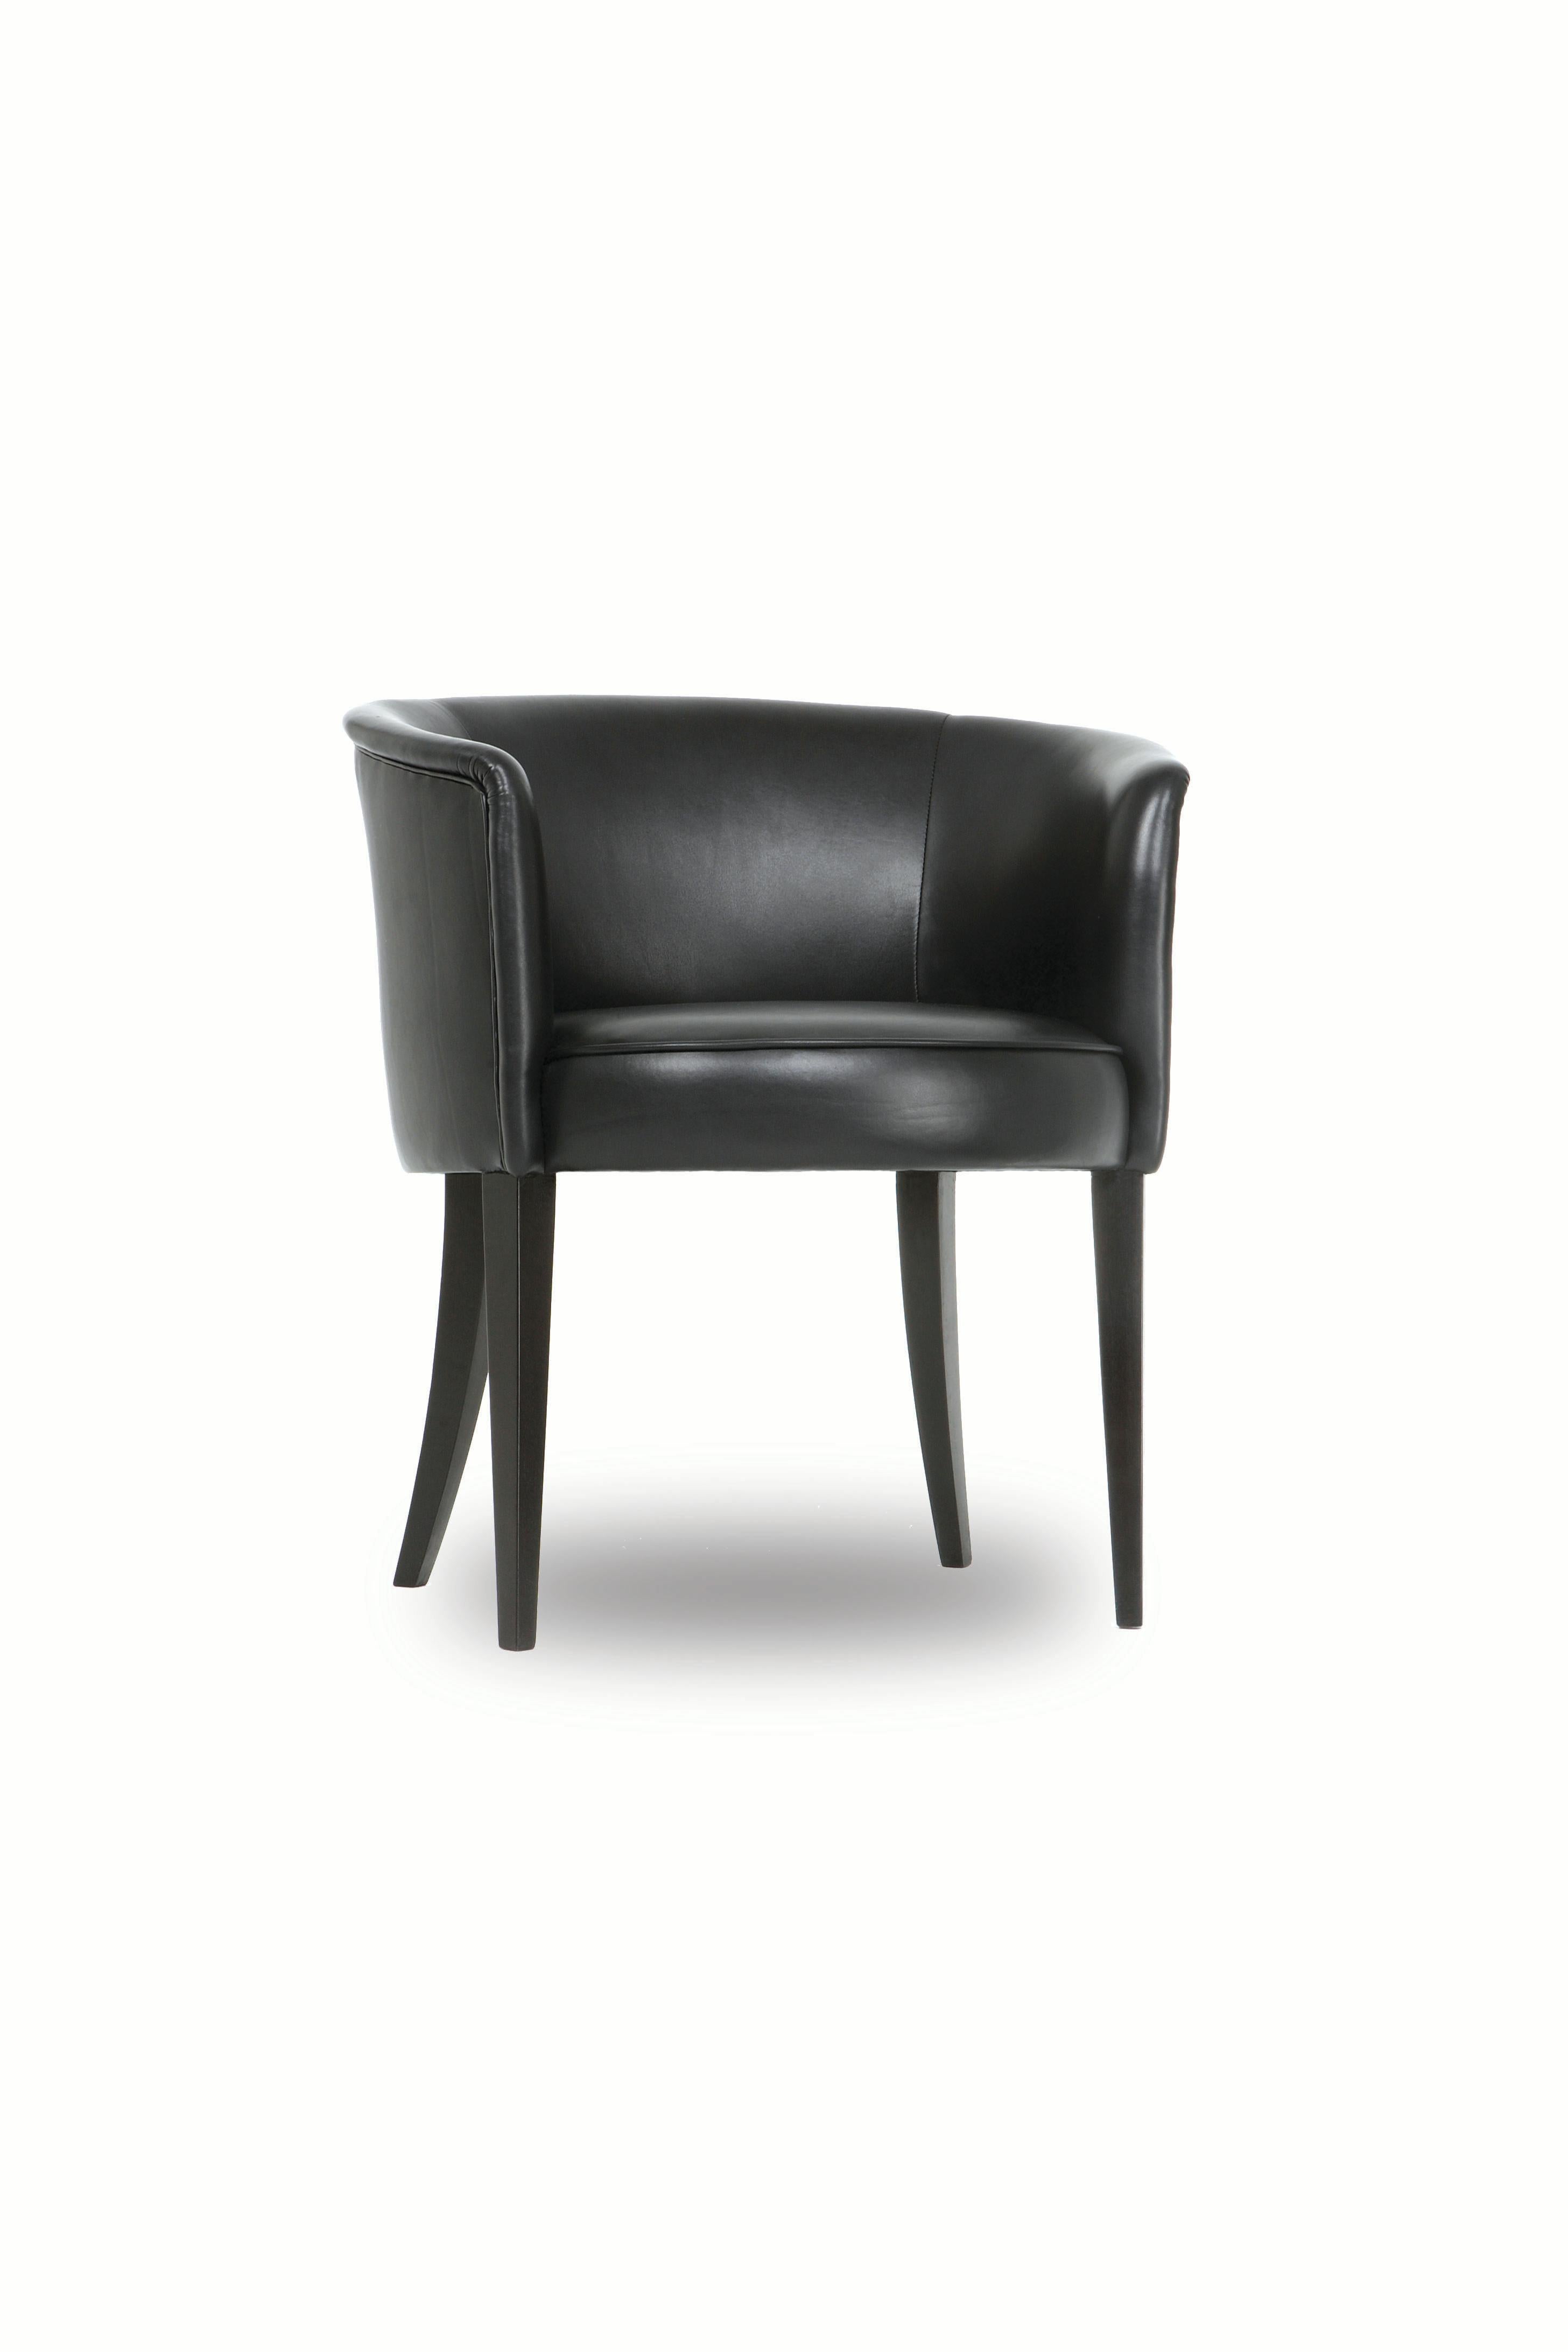 The Round chair has a tight upholstered seat and back. Seams are finished with self welts. Tapered front legs and curved back legs are made of blackened hardwood. 

Made to order and handcrafted in the USA. Available in leather in a range of colors